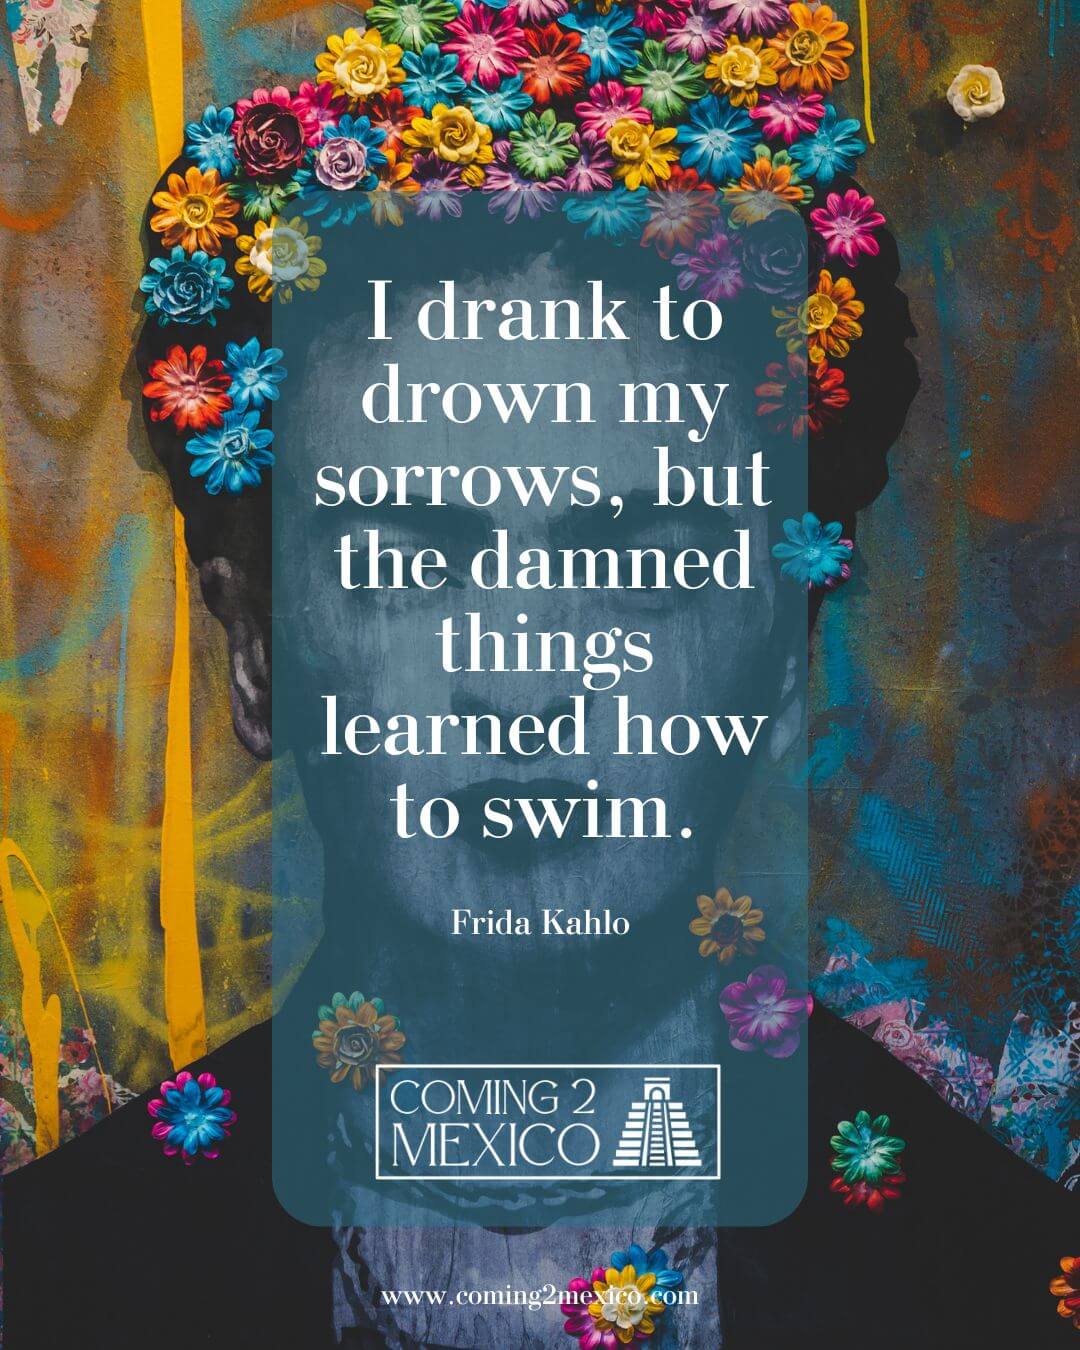 "I drank to drown my sorrows, but the damned things learned how to swim." — Frida Kahlo